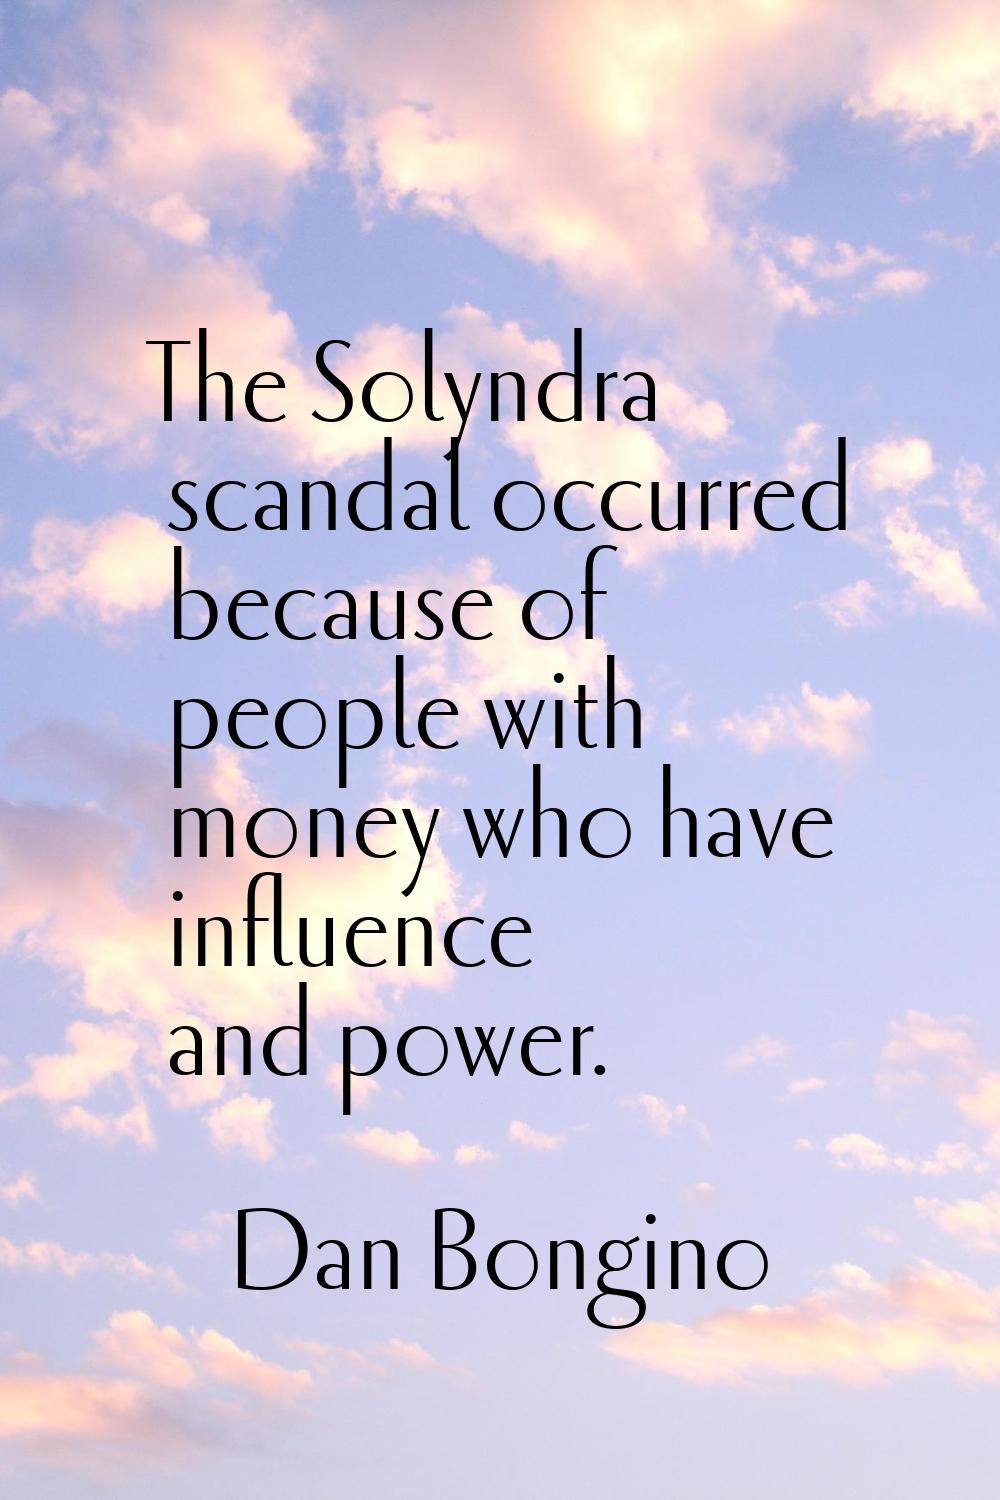 The Solyndra scandal occurred because of people with money who have influence and power.